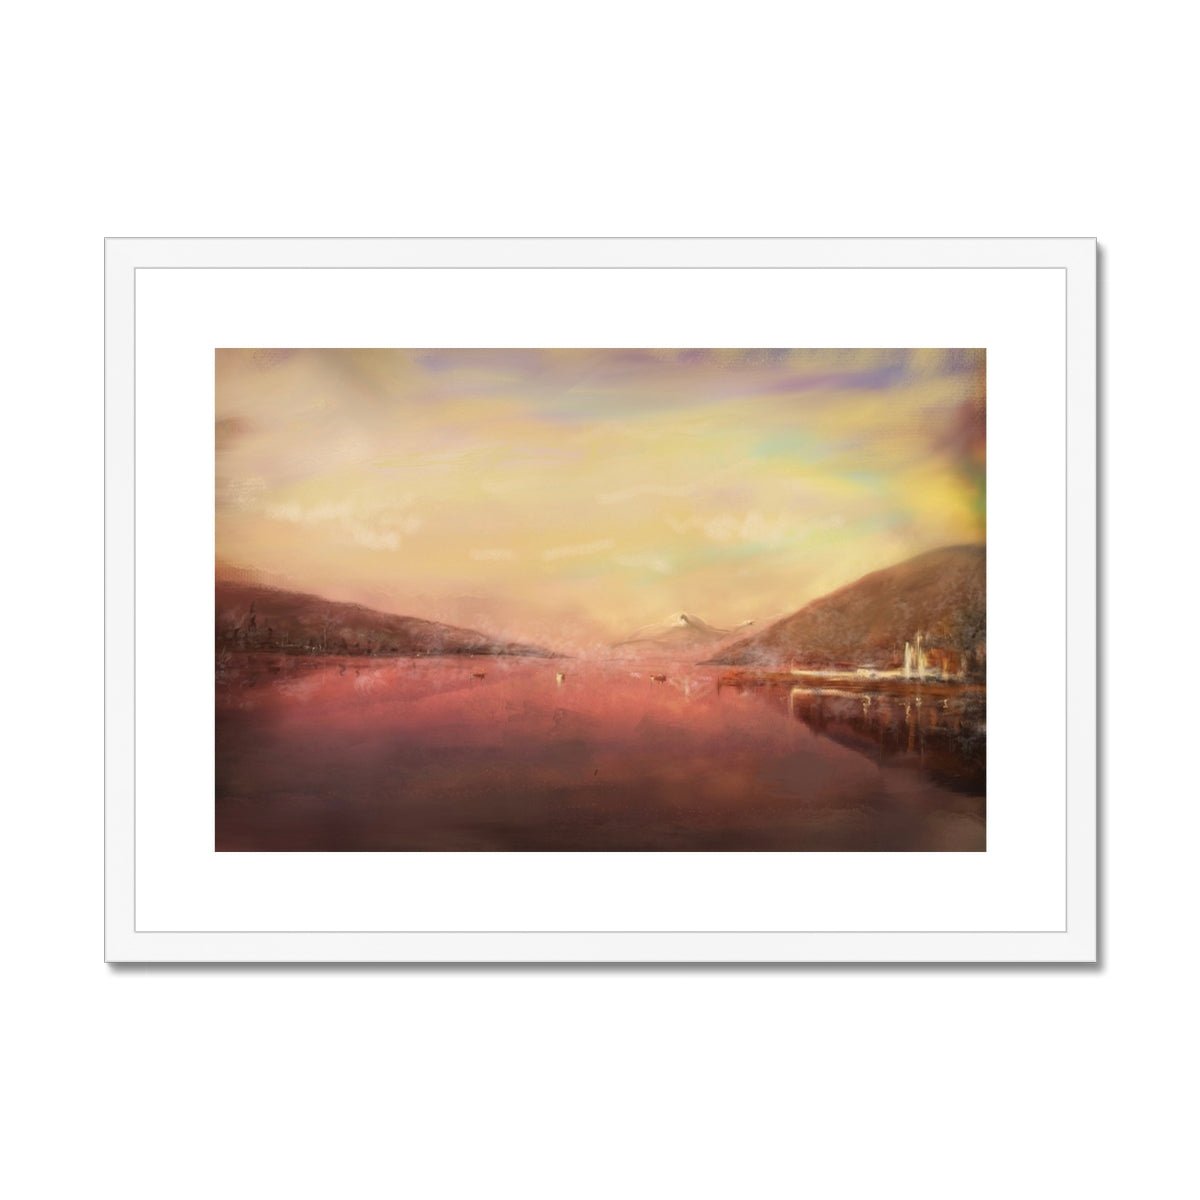 Loch Tay Painting | Framed & Mounted Prints From Scotland-Framed & Mounted Prints-Scottish Lochs & Mountains Art Gallery-A2 Landscape-White Frame-Paintings, Prints, Homeware, Art Gifts From Scotland By Scottish Artist Kevin Hunter